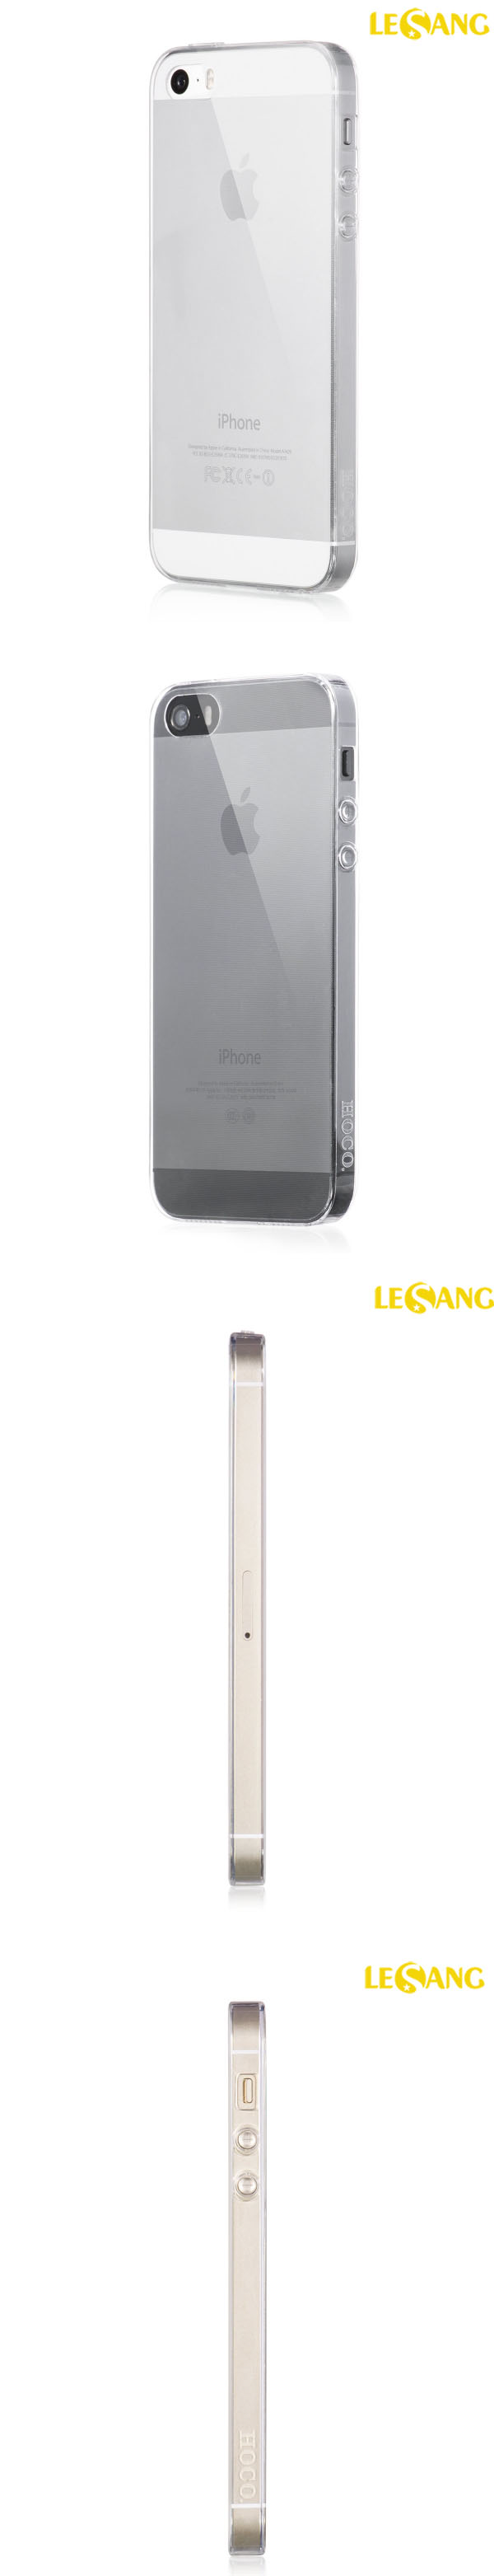 Ốp lưng iphone 5S/5 HOCO nhựa dẻo trong suốt 3